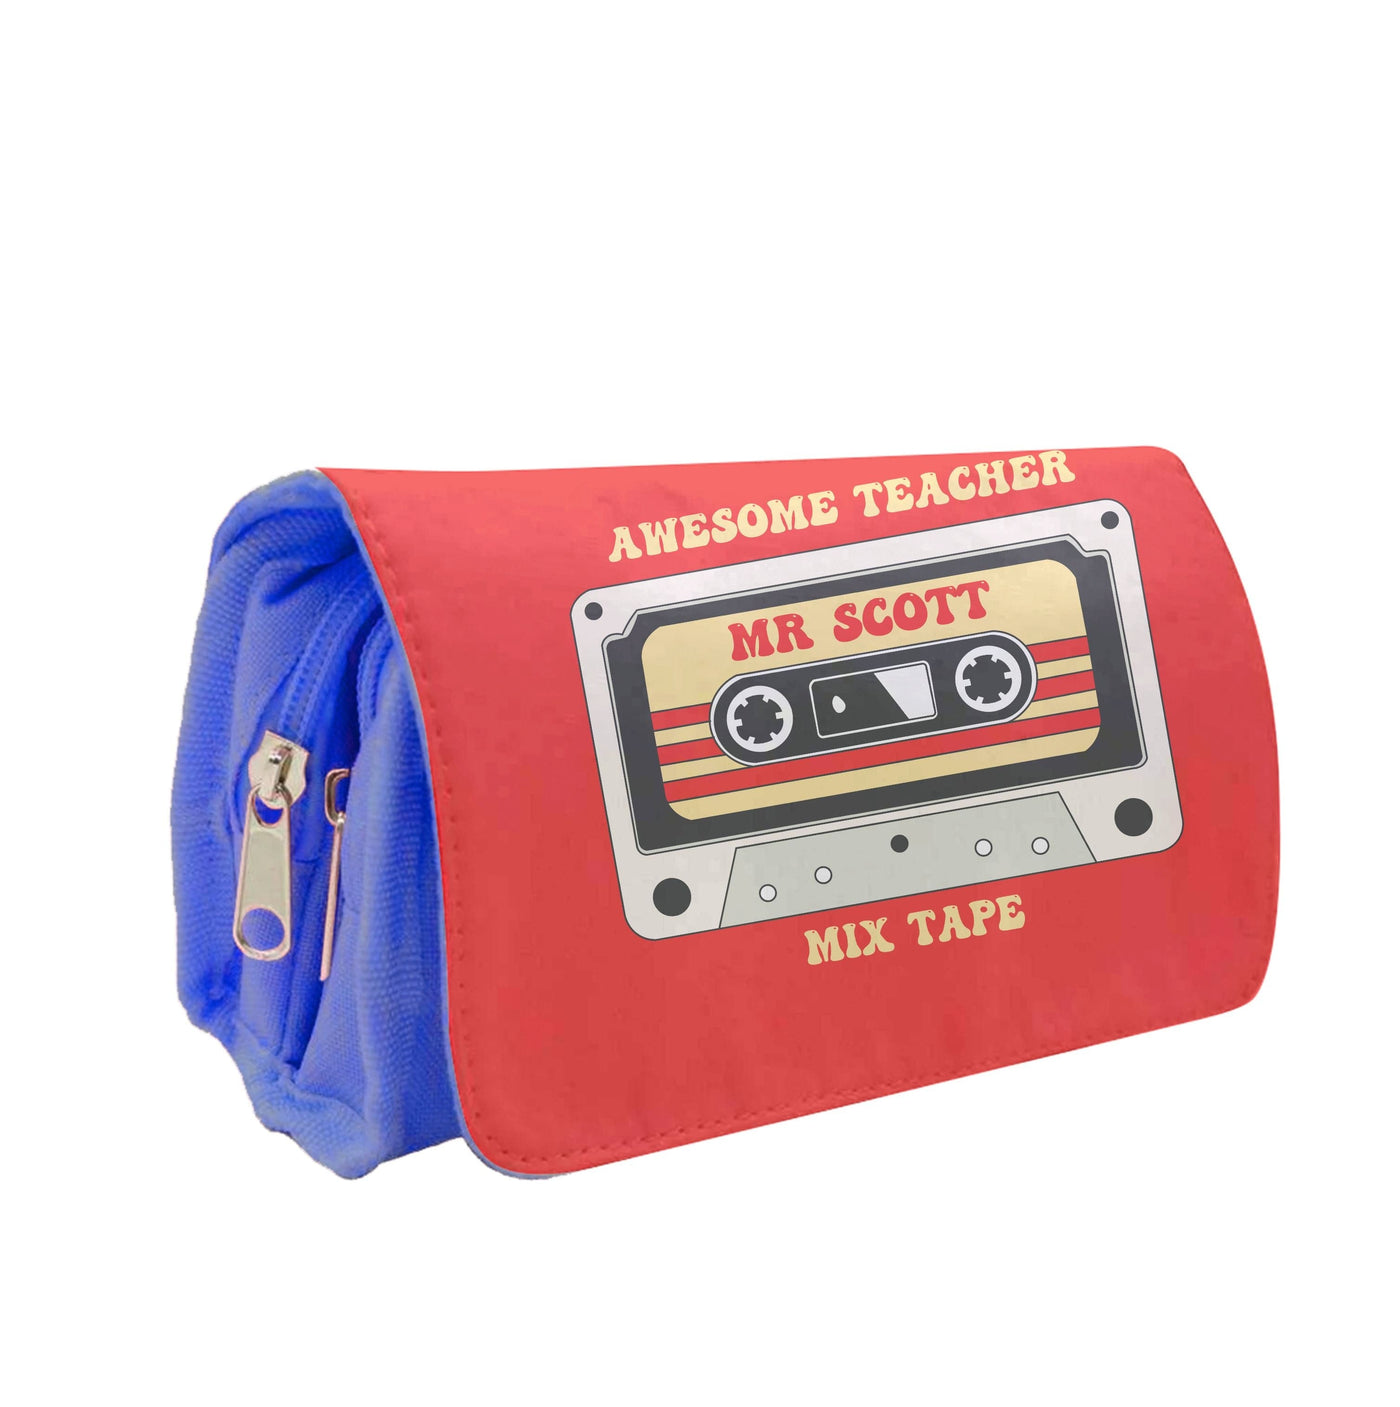 Awesome Teacher Mix Tape - Personalised Teachers Gift Pencil Case